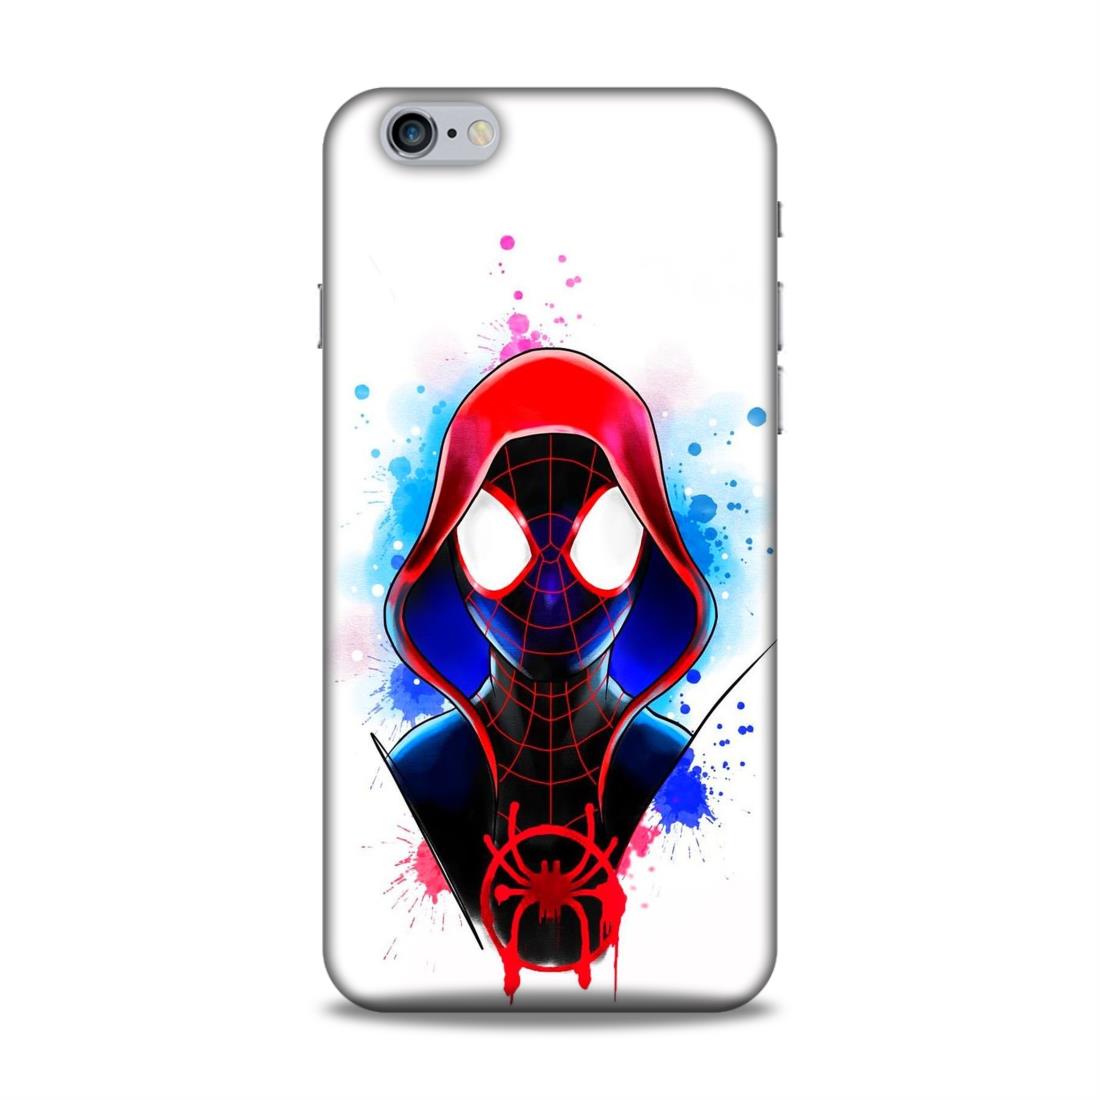 Right Marc Spidy Cartoon Hard Back Case For Apple iPhone 6 Plus / 6s Plus Apple Apple iPhone 6 Plus / 6s Plus Mobile Case